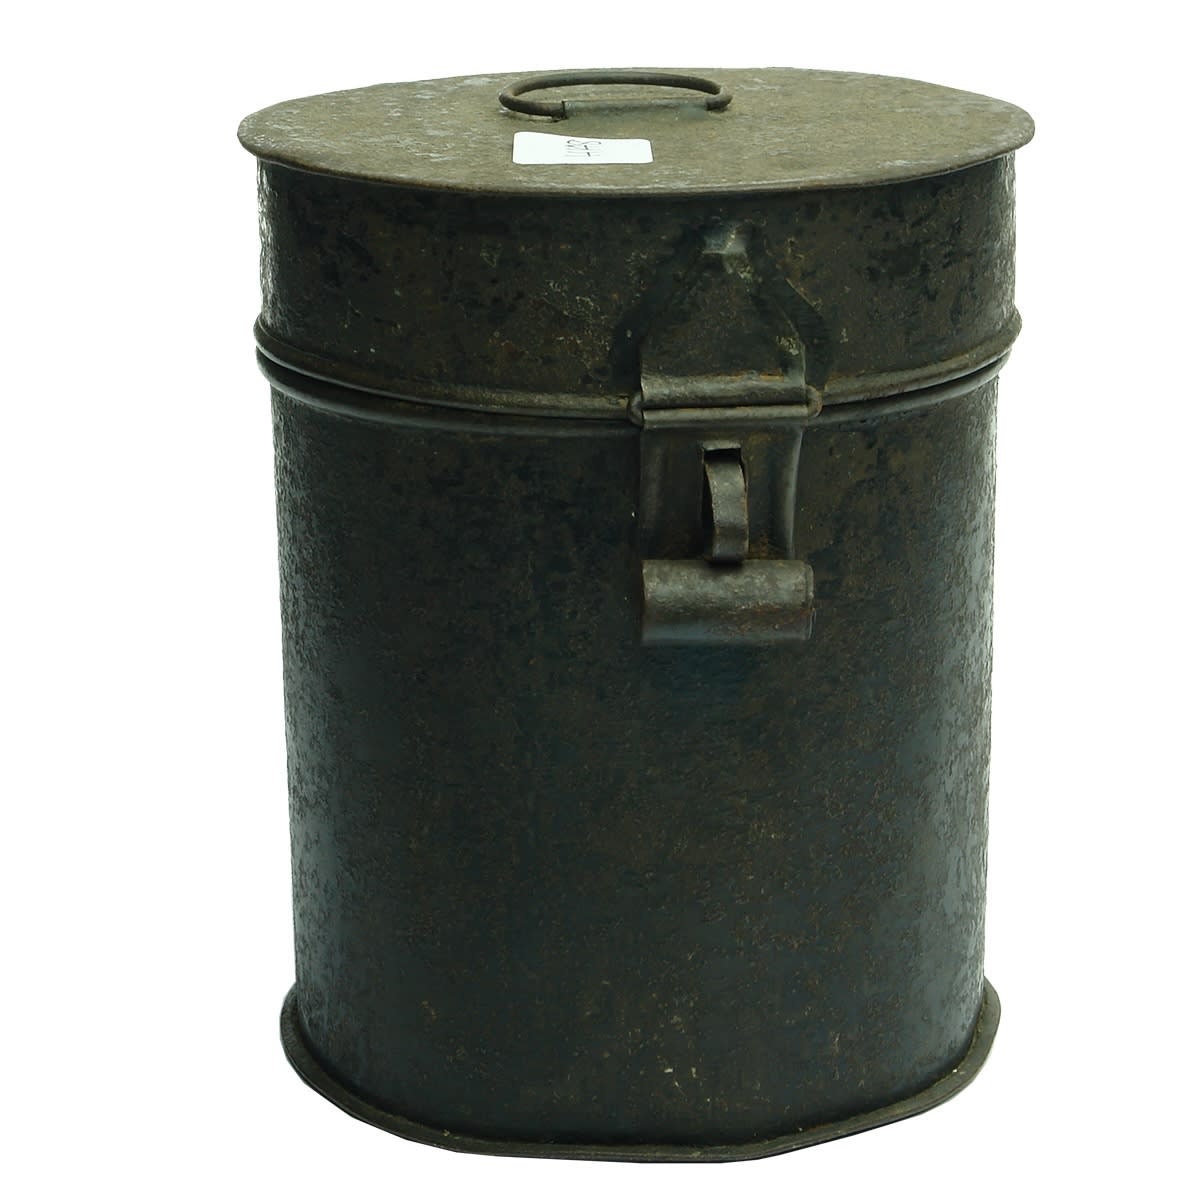 Early tin with a handle and a latch.